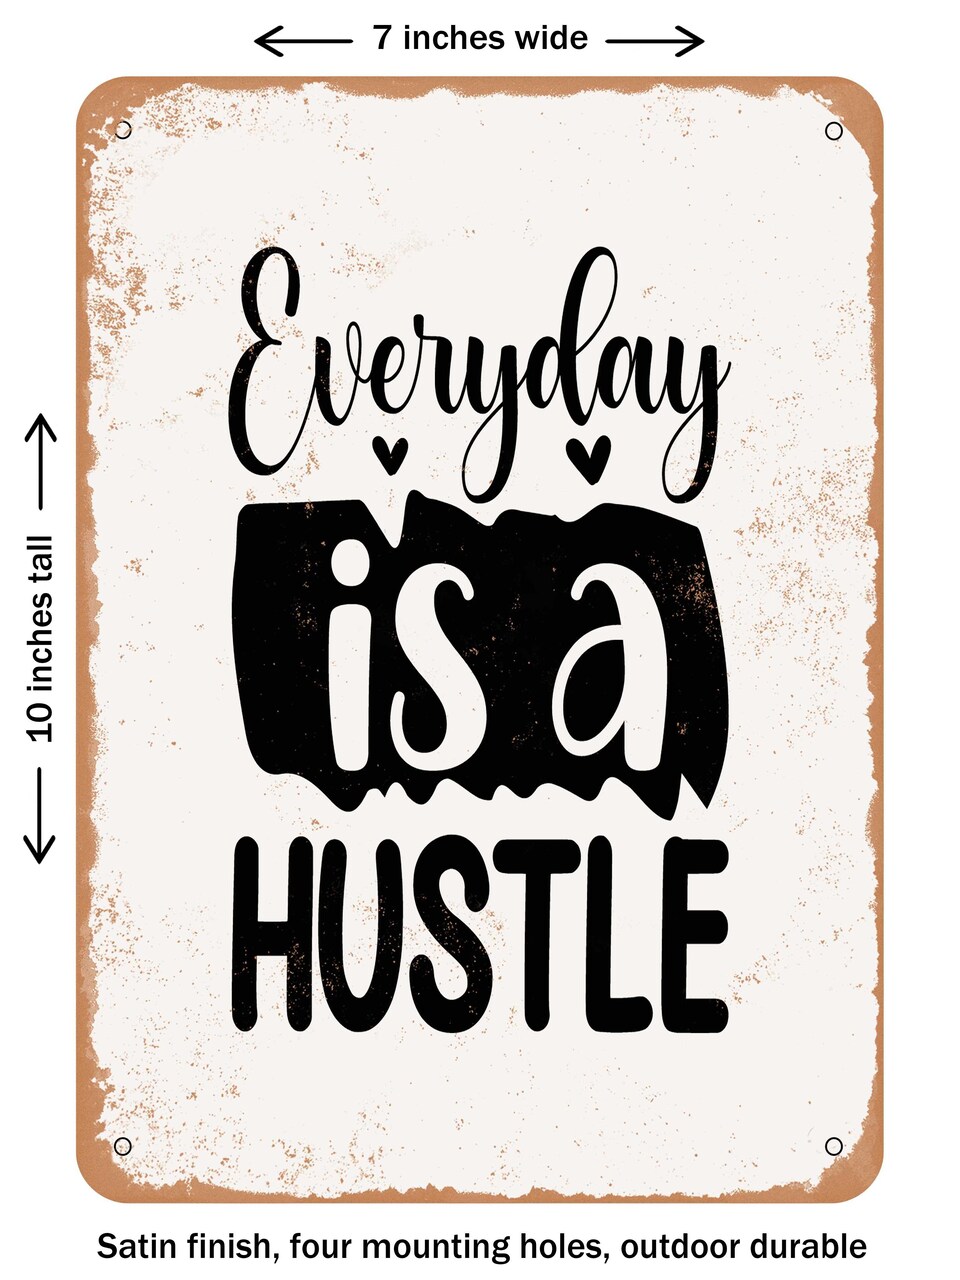 DECORATIVE METAL SIGN - Everyday is a Hustle  - Vintage Rusty Look